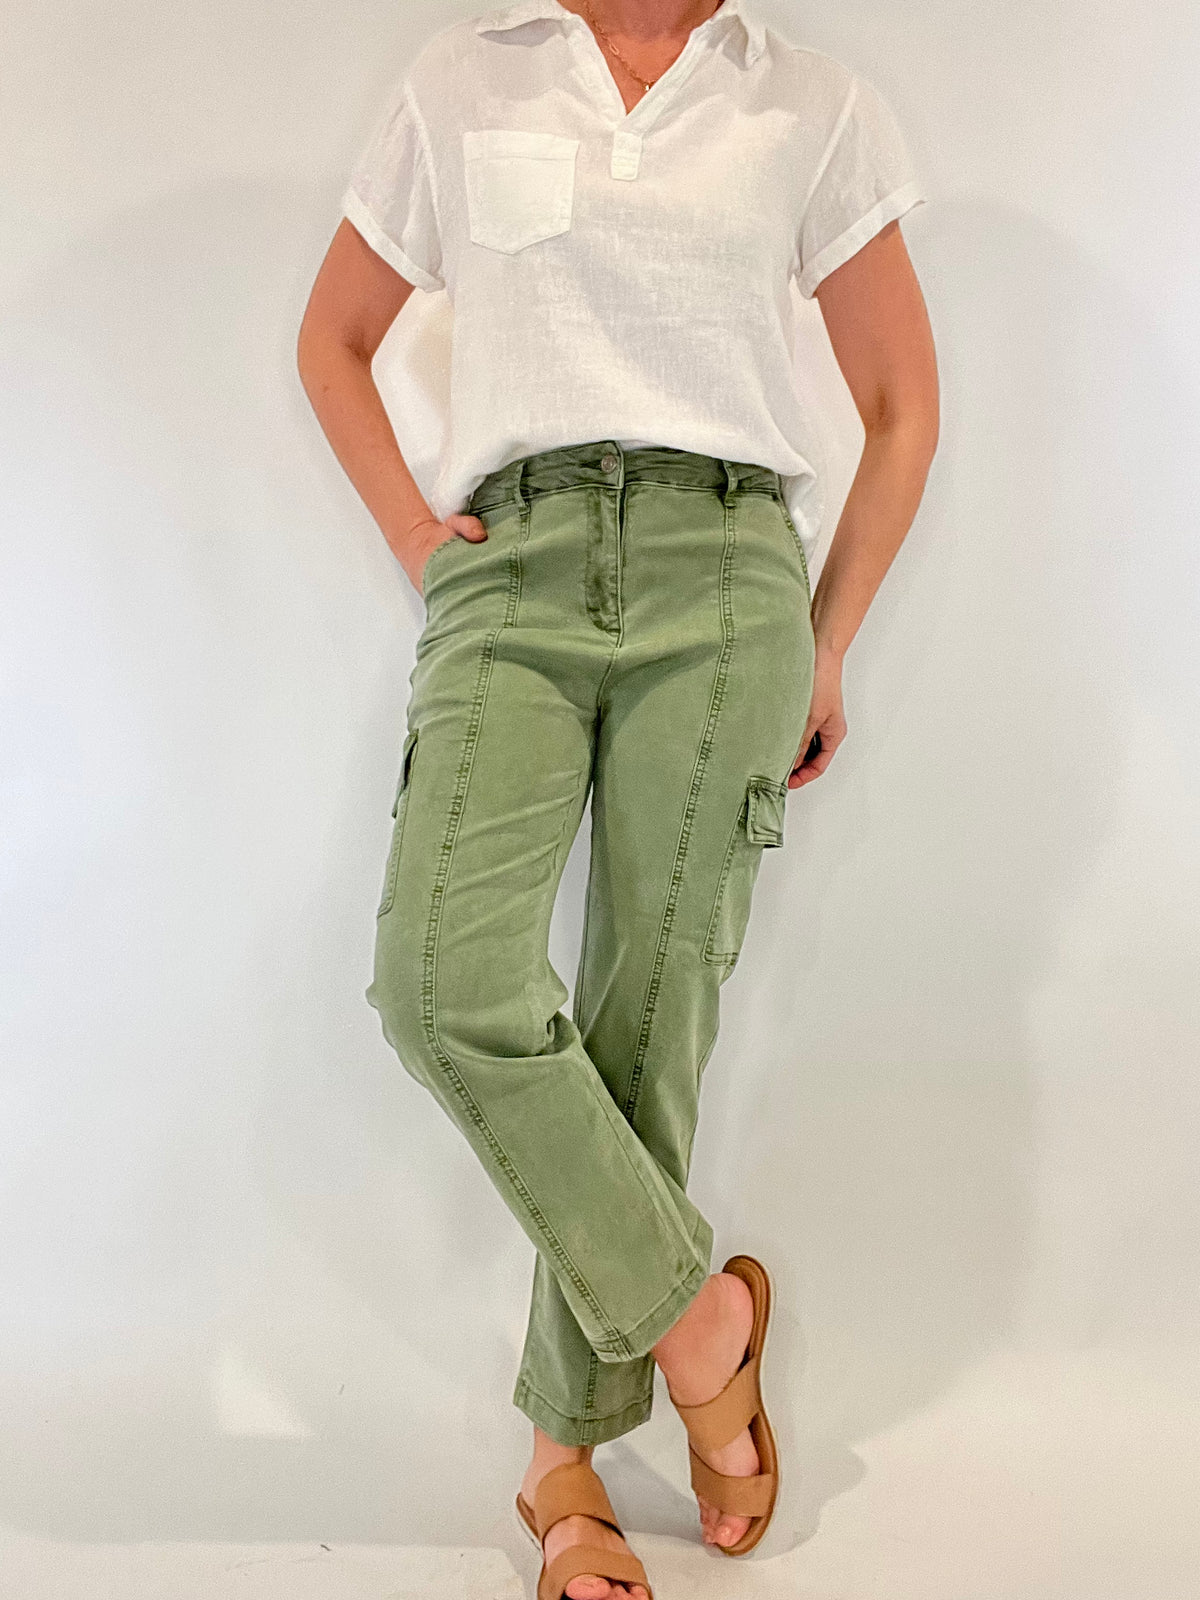 Indulge in a sense of effortless refinement with our Cargo Pants in olive green. Featuring front and back pockets, a straight fit, and a slight crop, these versatile pants embody casual sophistication.